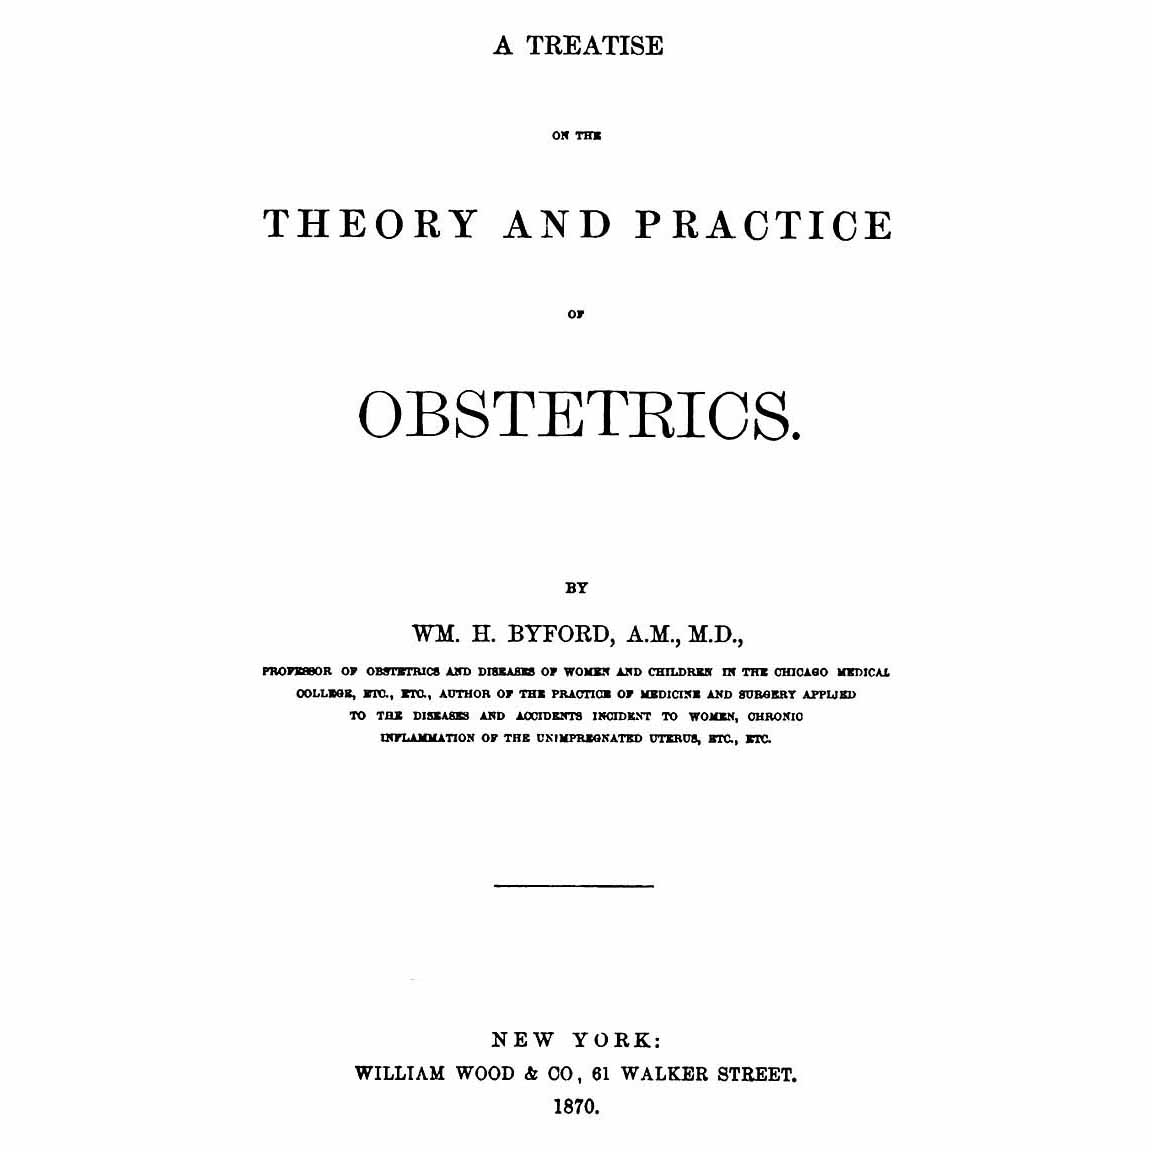 1870-BYFORD-Treatise-Theory-Practice-Obst-title